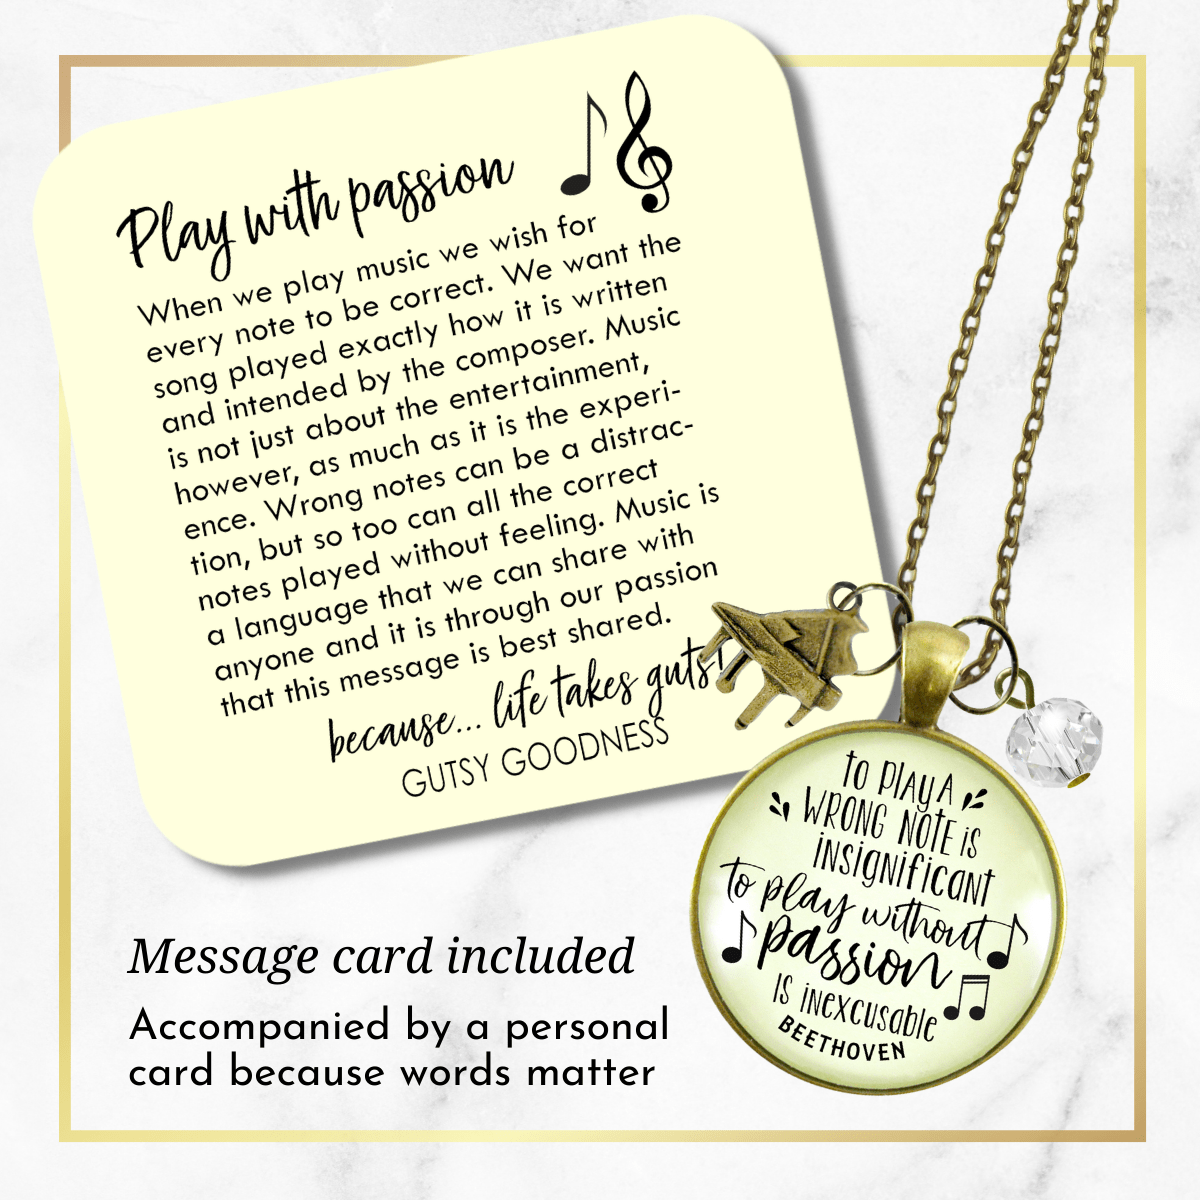 Gutsy Goodness Piano Necklace To Play Wrong Note Is Insignificant Beethoven Music Teacher - Gutsy Goodness Handmade Jewelry;Piano Necklace To Play Wrong Note Is Insignificant Beethoven Music Teacher - Gutsy Goodness Handmade Jewelry Gifts